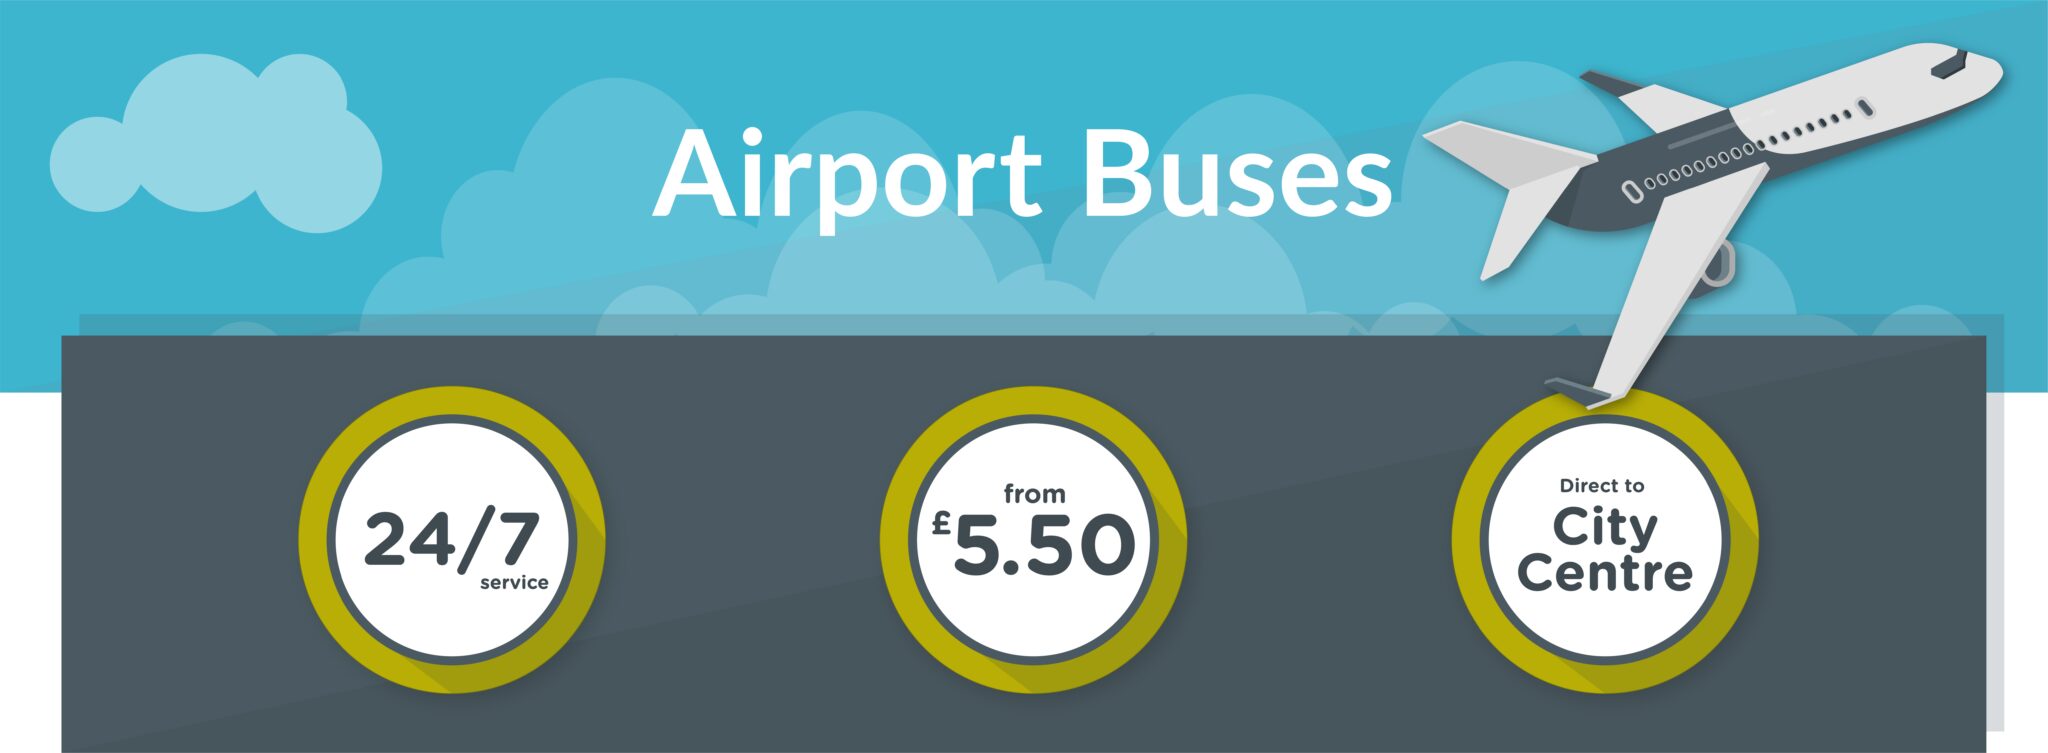 Airport Buses - 24/7 service, prices from £5.50, direct to city centre